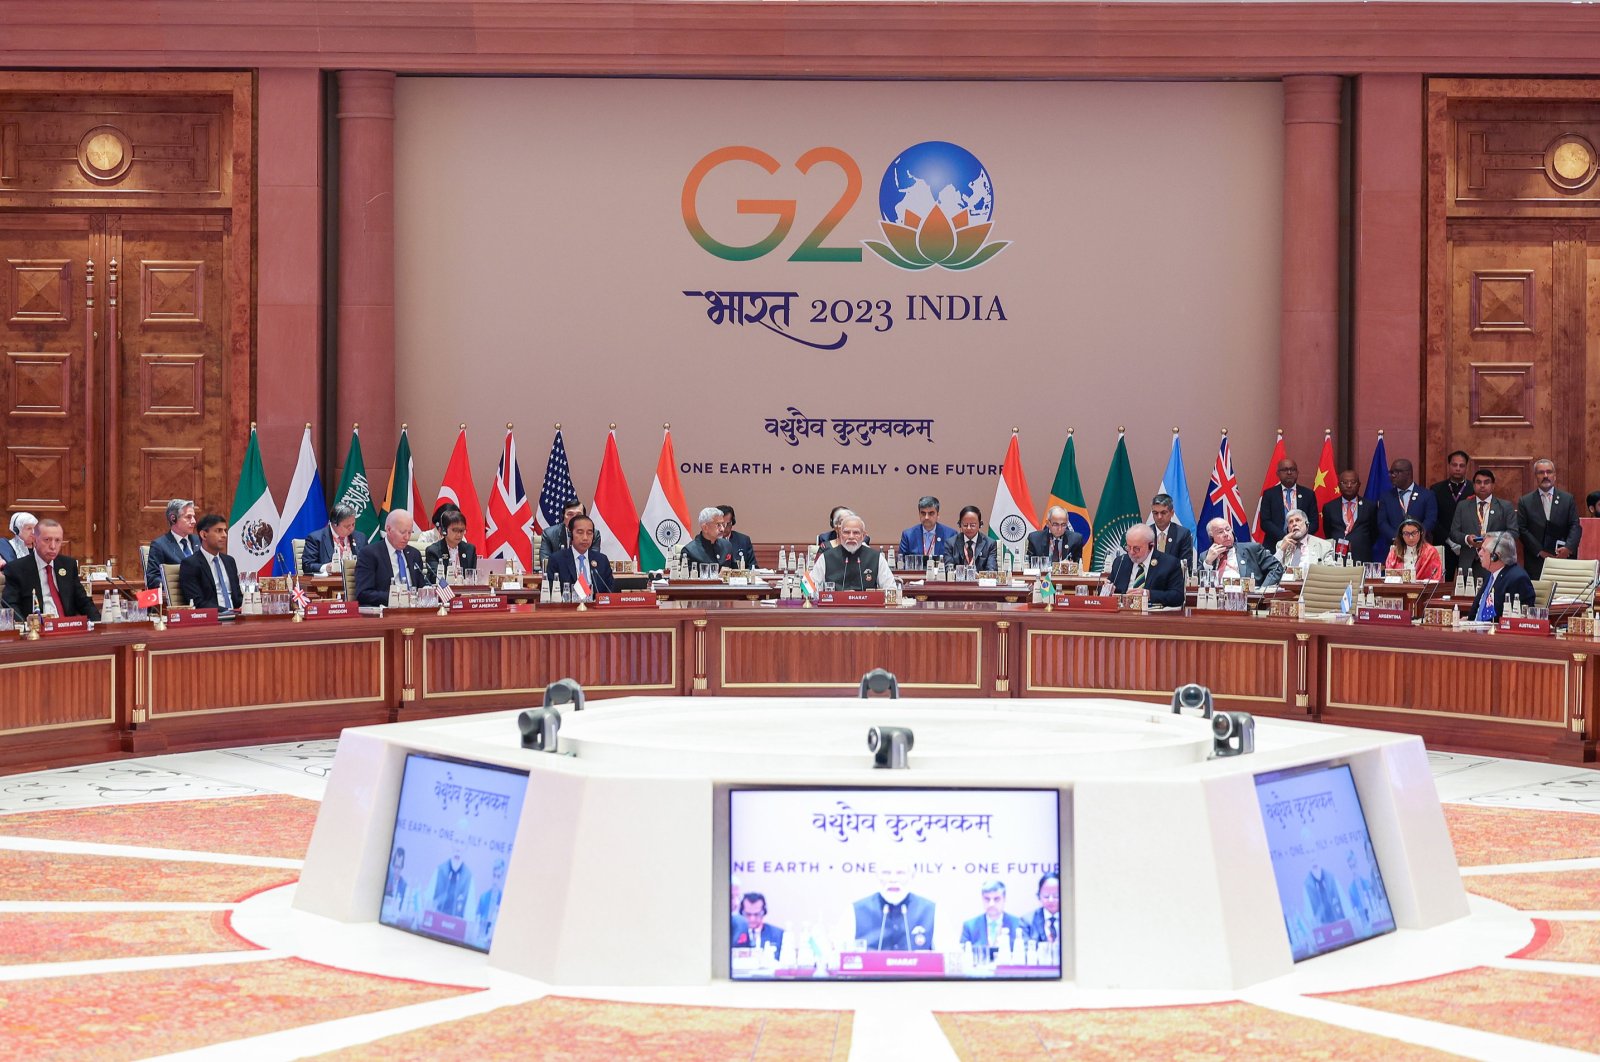 A handout photo made available by the Indian Press Information Bureau (PIB) shows the G-20 leaders during the summit at ITPO Convention Centre Pragati Maidan in New Delhi, India, Sept. 9, 2023. (EPA Photo)